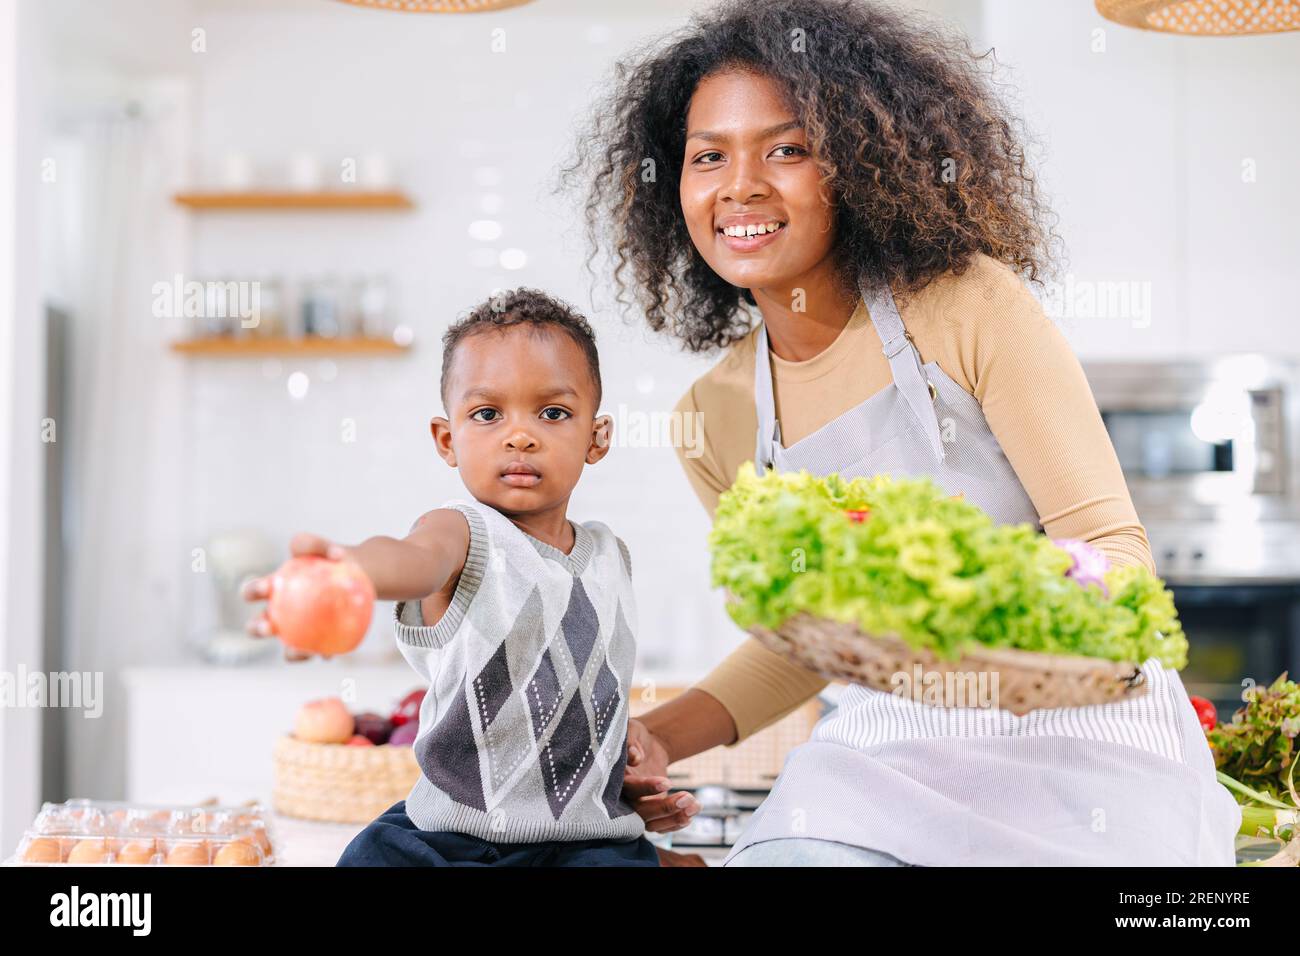 https://c8.alamy.com/comp/2RENYRE/african-black-mother-with-cute-son-child-portrait-happy-enjoy-healthy-food-cooking-at-home-kitchen-holiday-activity-2RENYRE.jpg